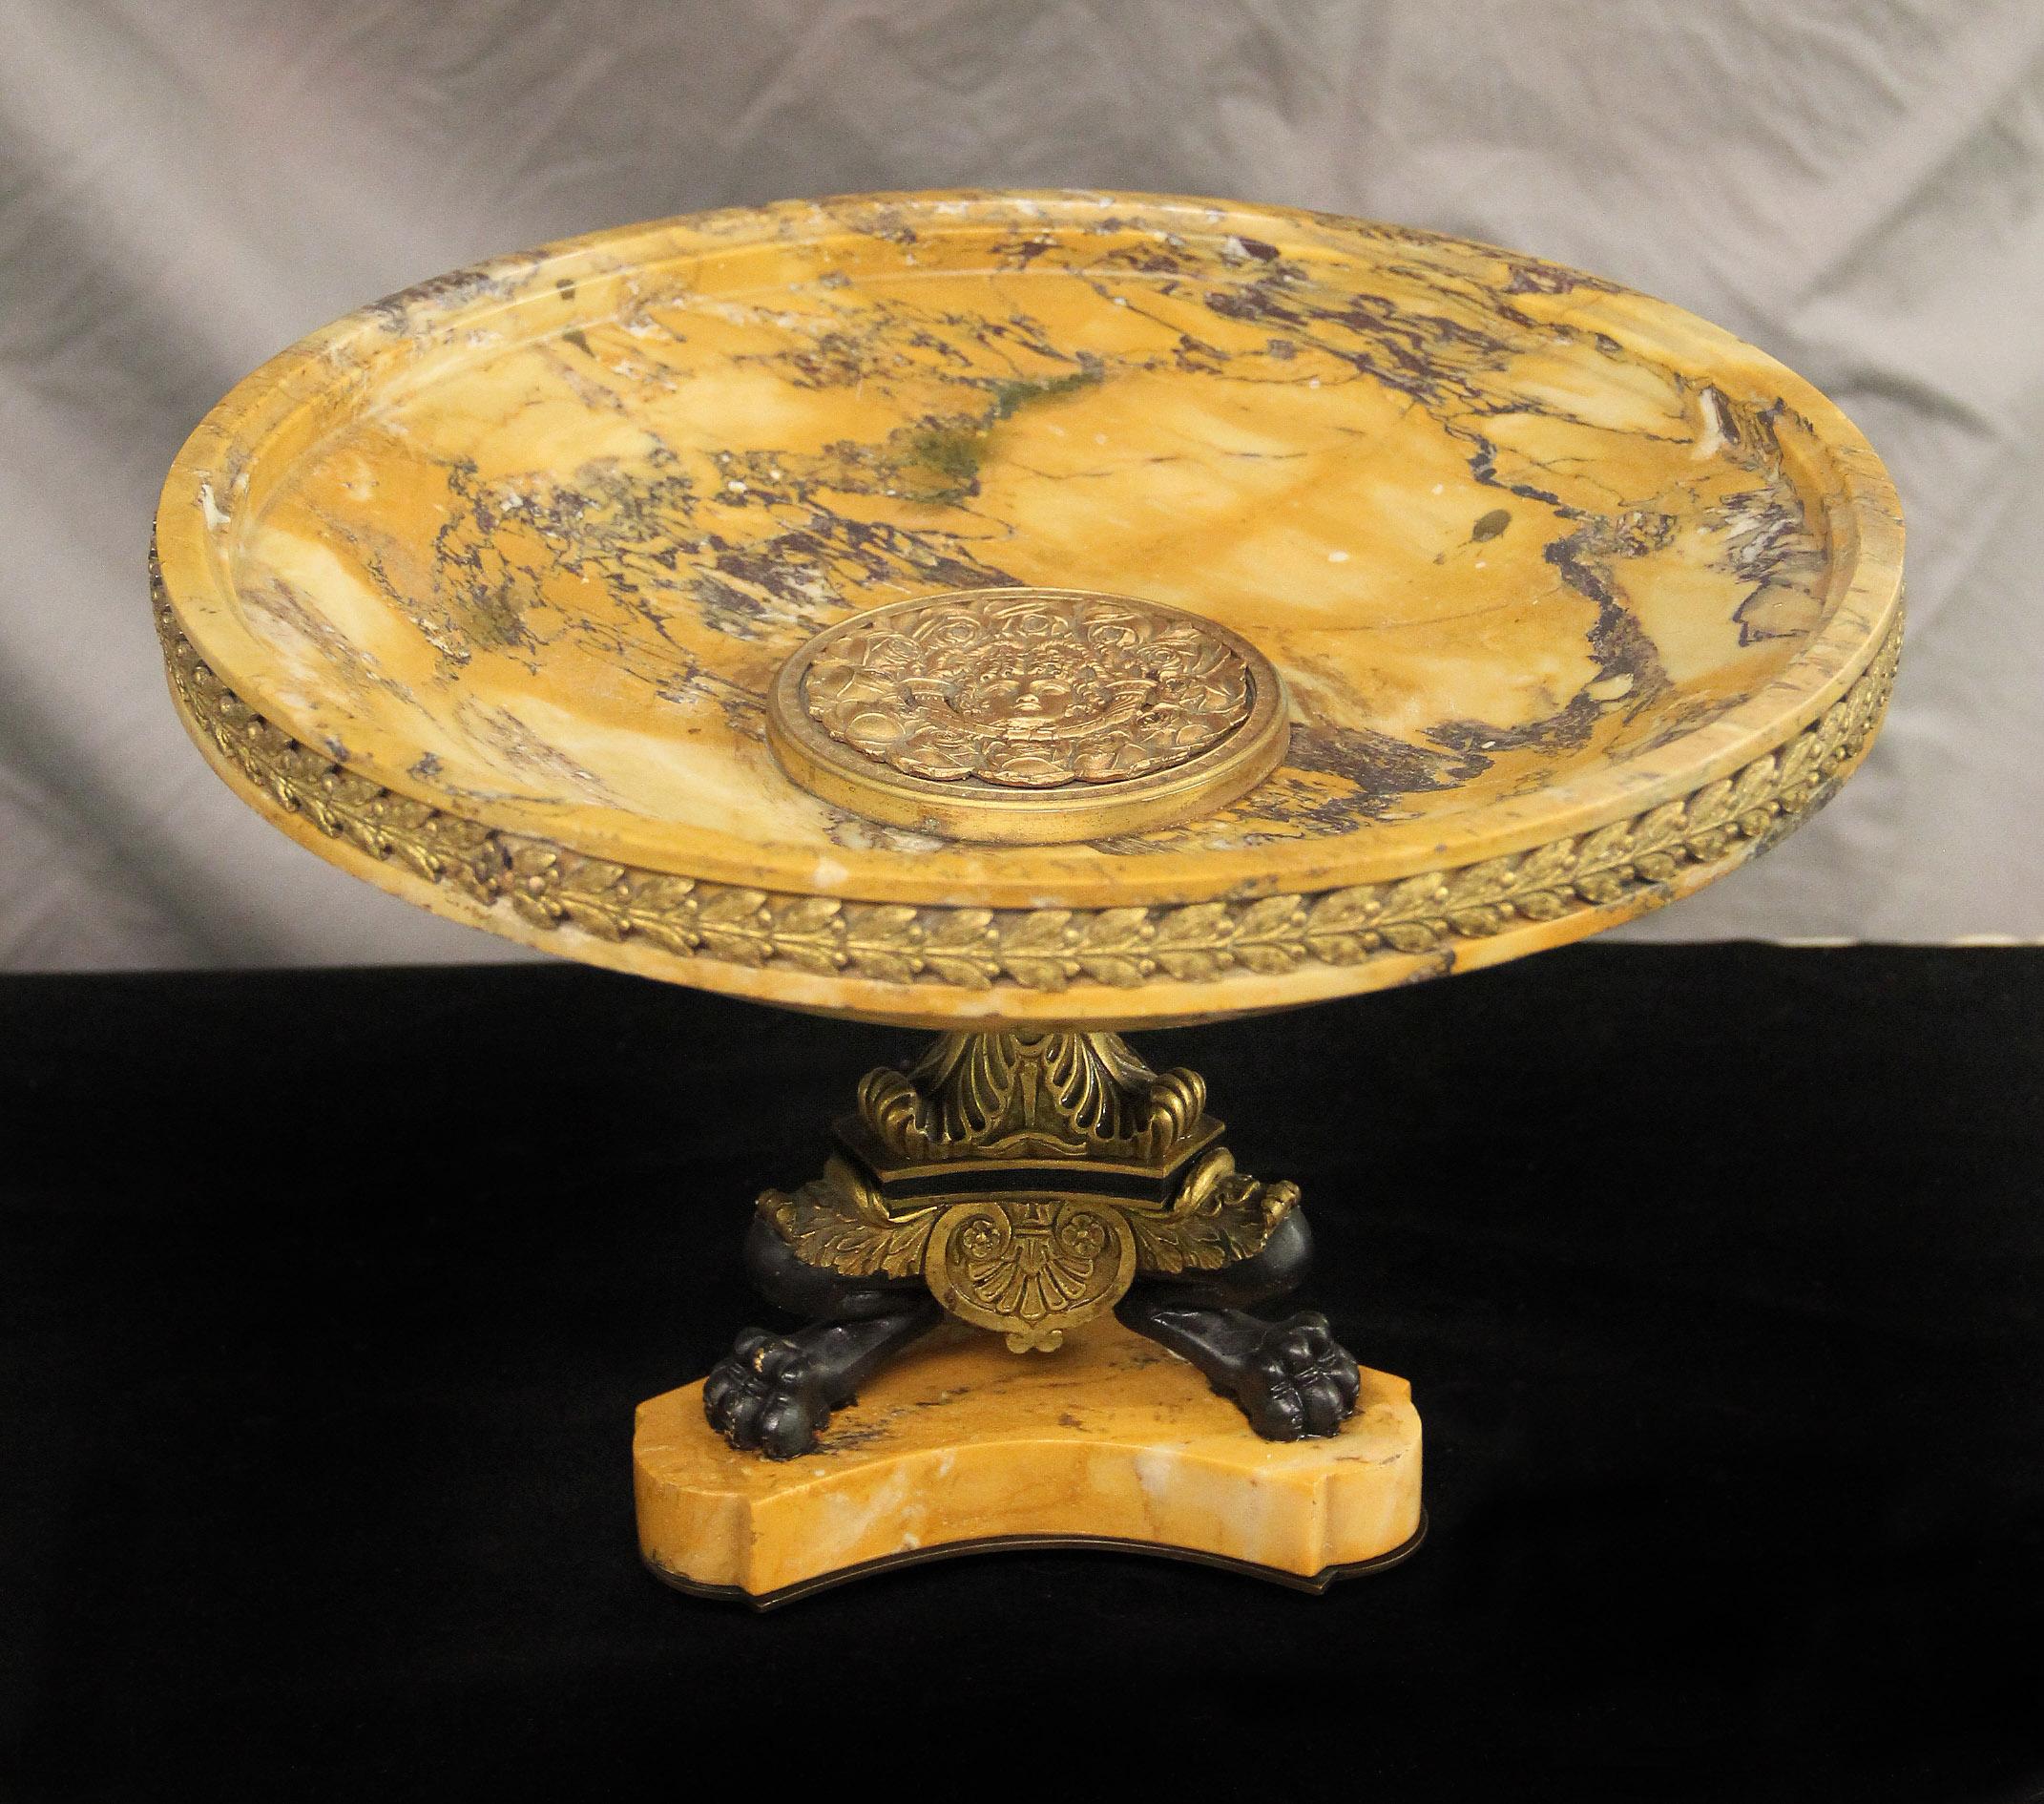 An interesting late 19th century bronze and marble centerpiece

A large marble plate centered with a bronze medallion of Apollo surrounded by roses, the base with gilt and patina bronze paws.